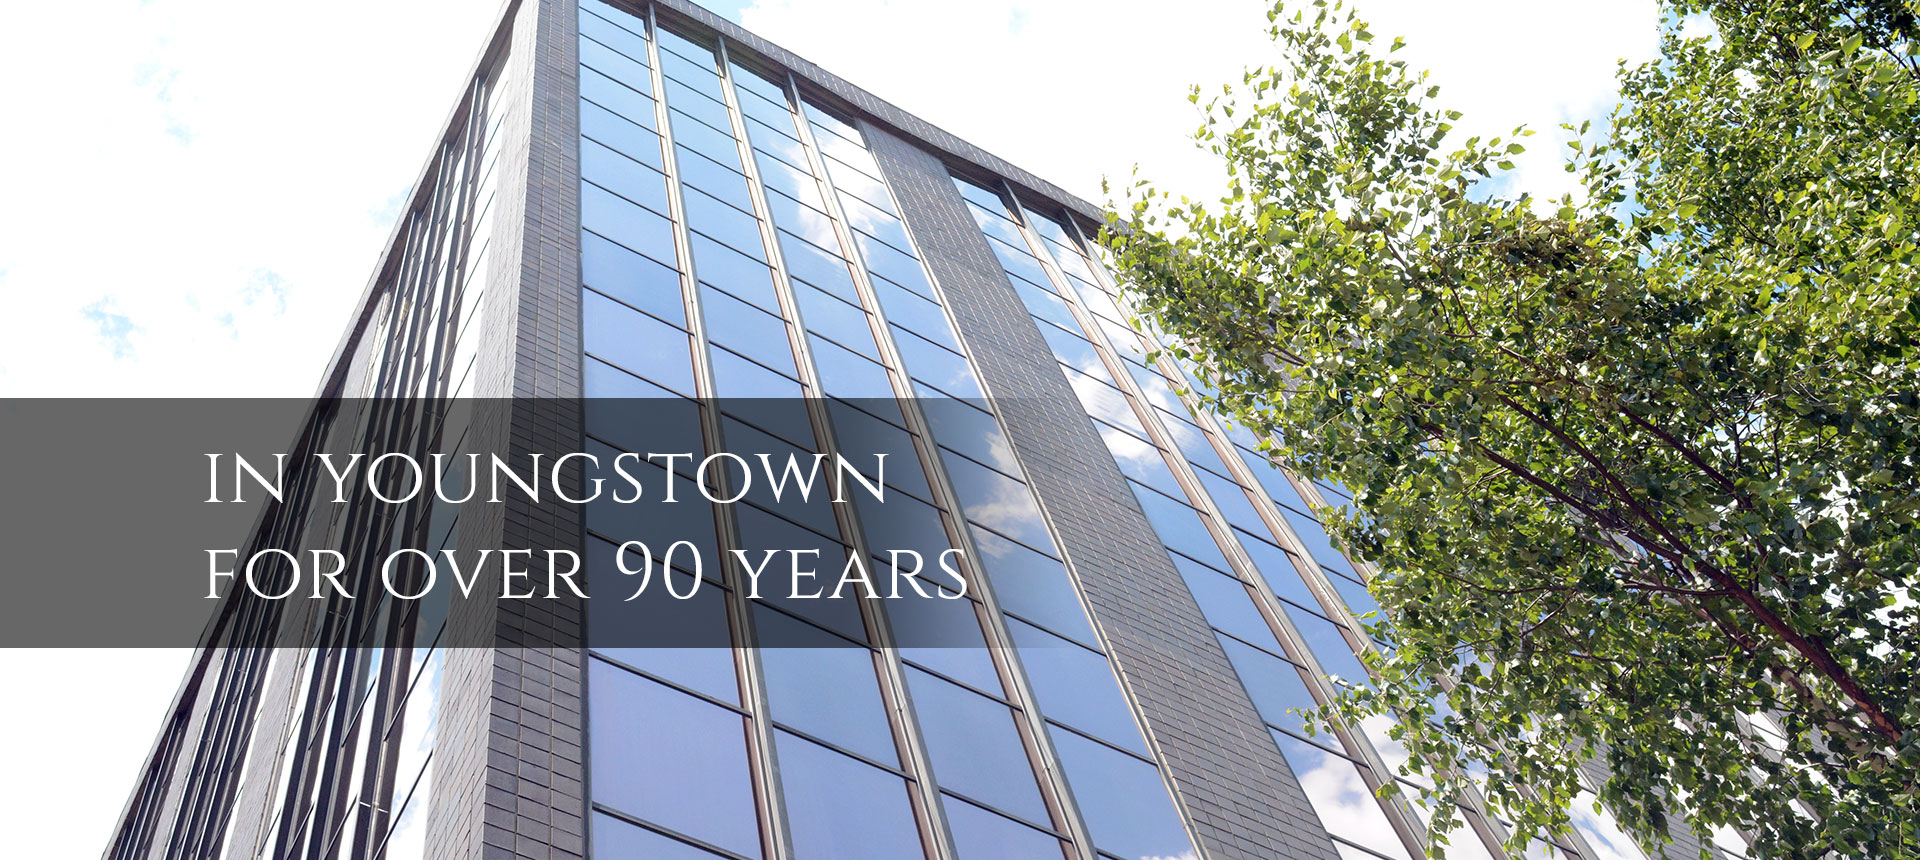 In Youngstown for over 90 years